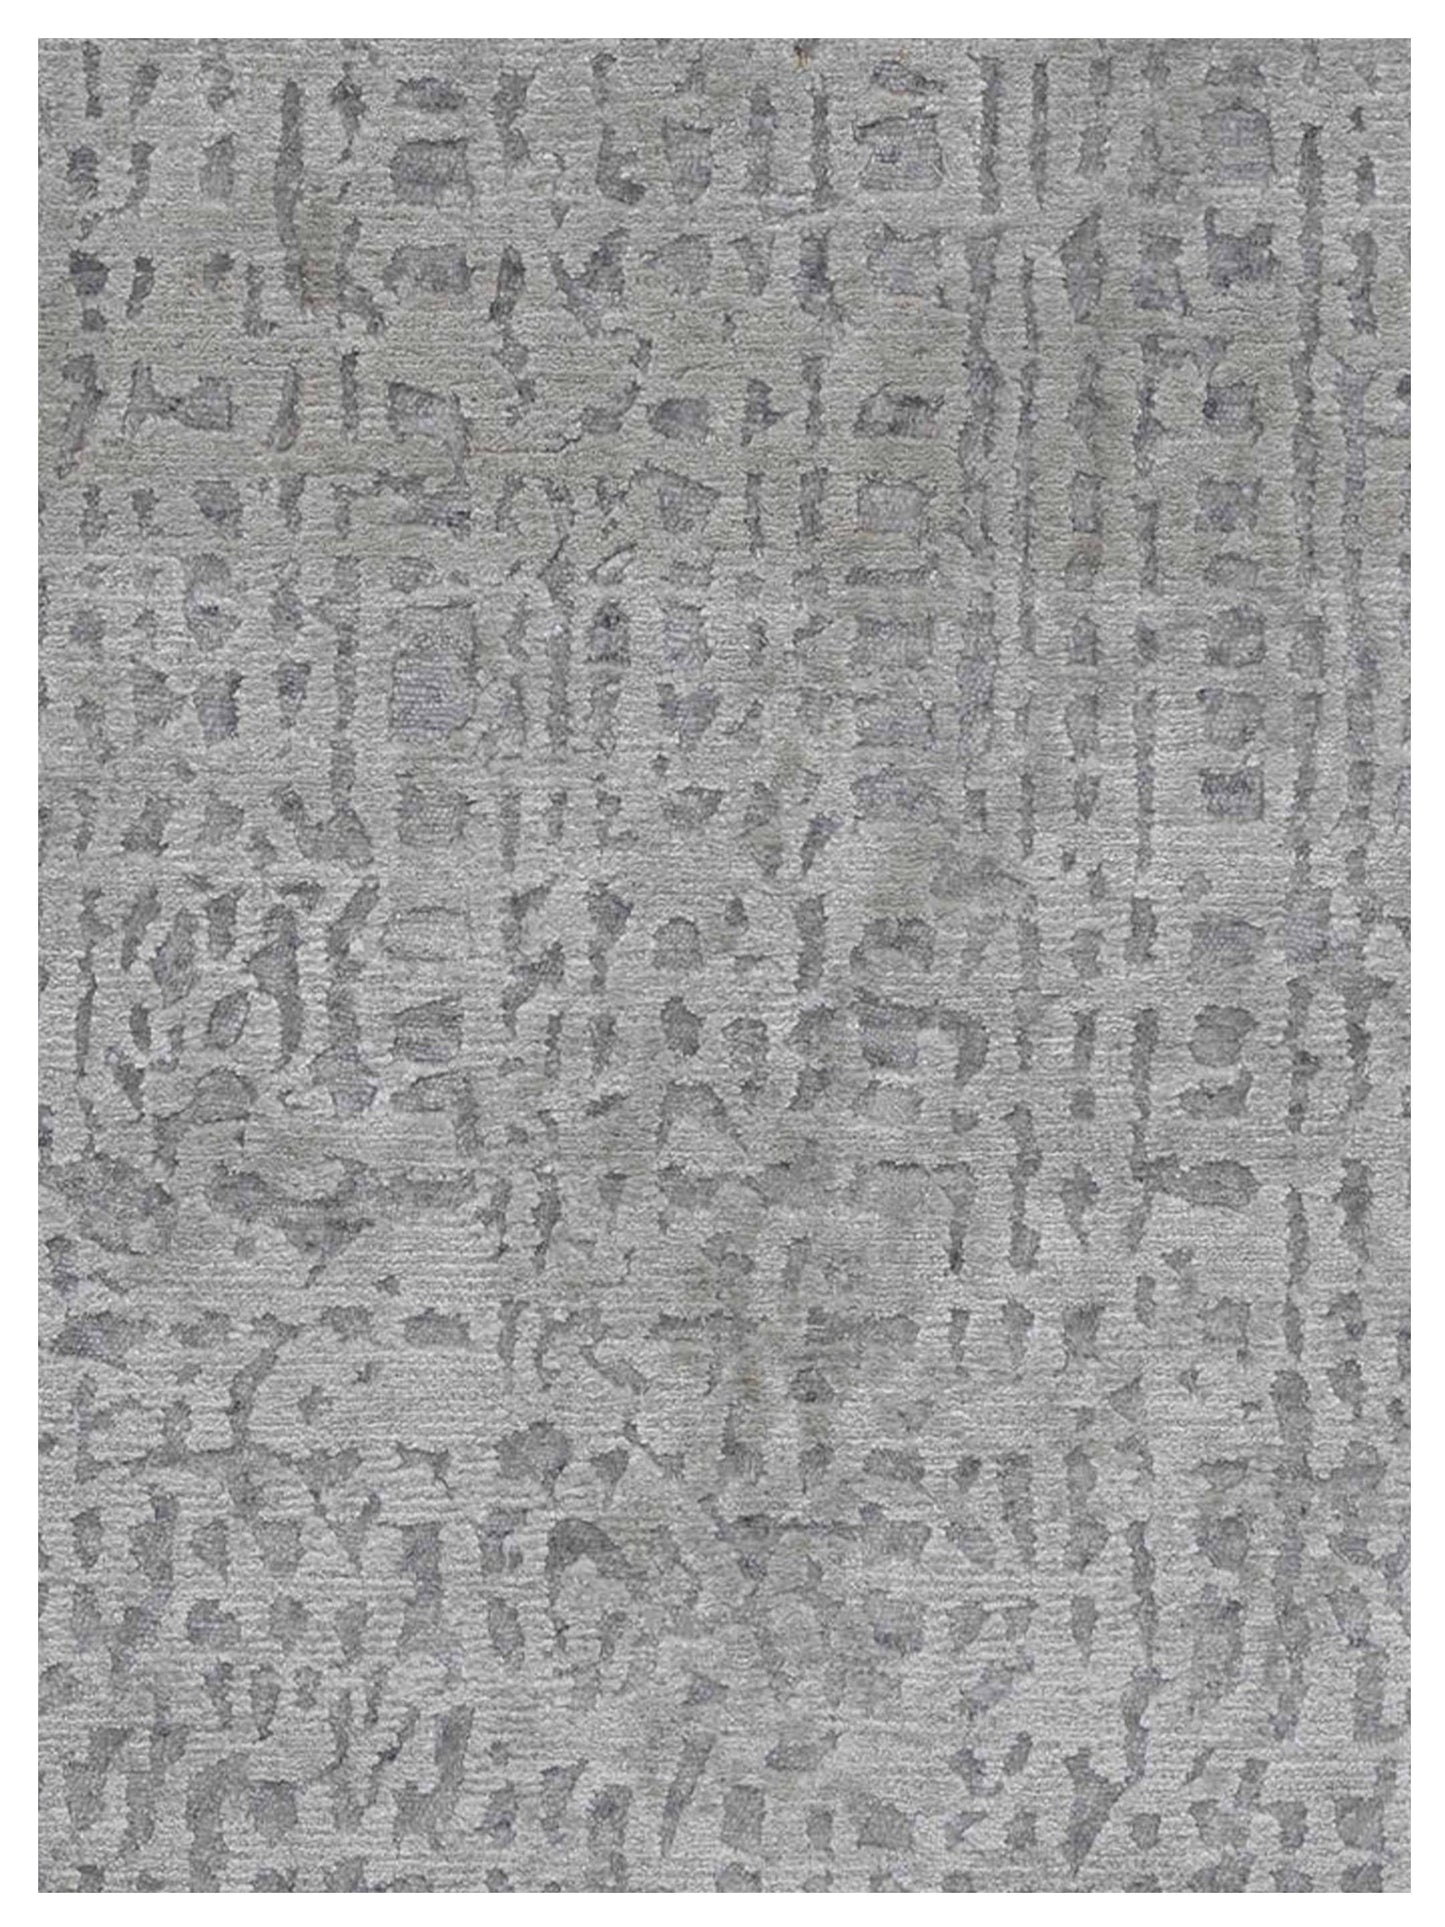 Artisan Mary  Mist  Contemporary Knotted Rug